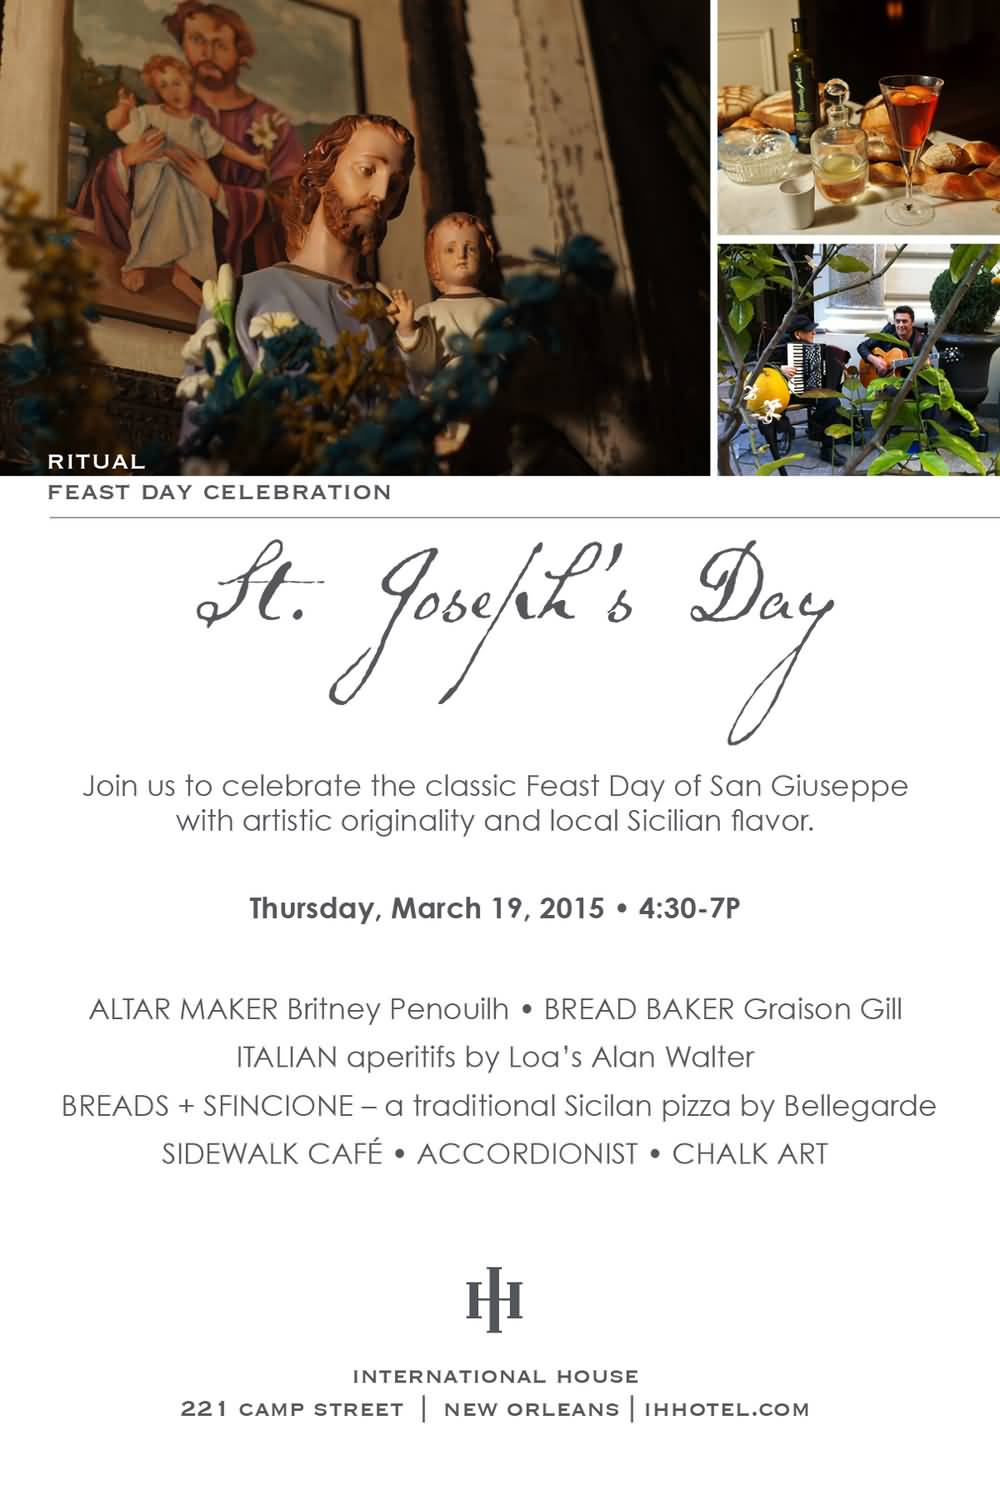 St. Joseph's Day Wishes Poster